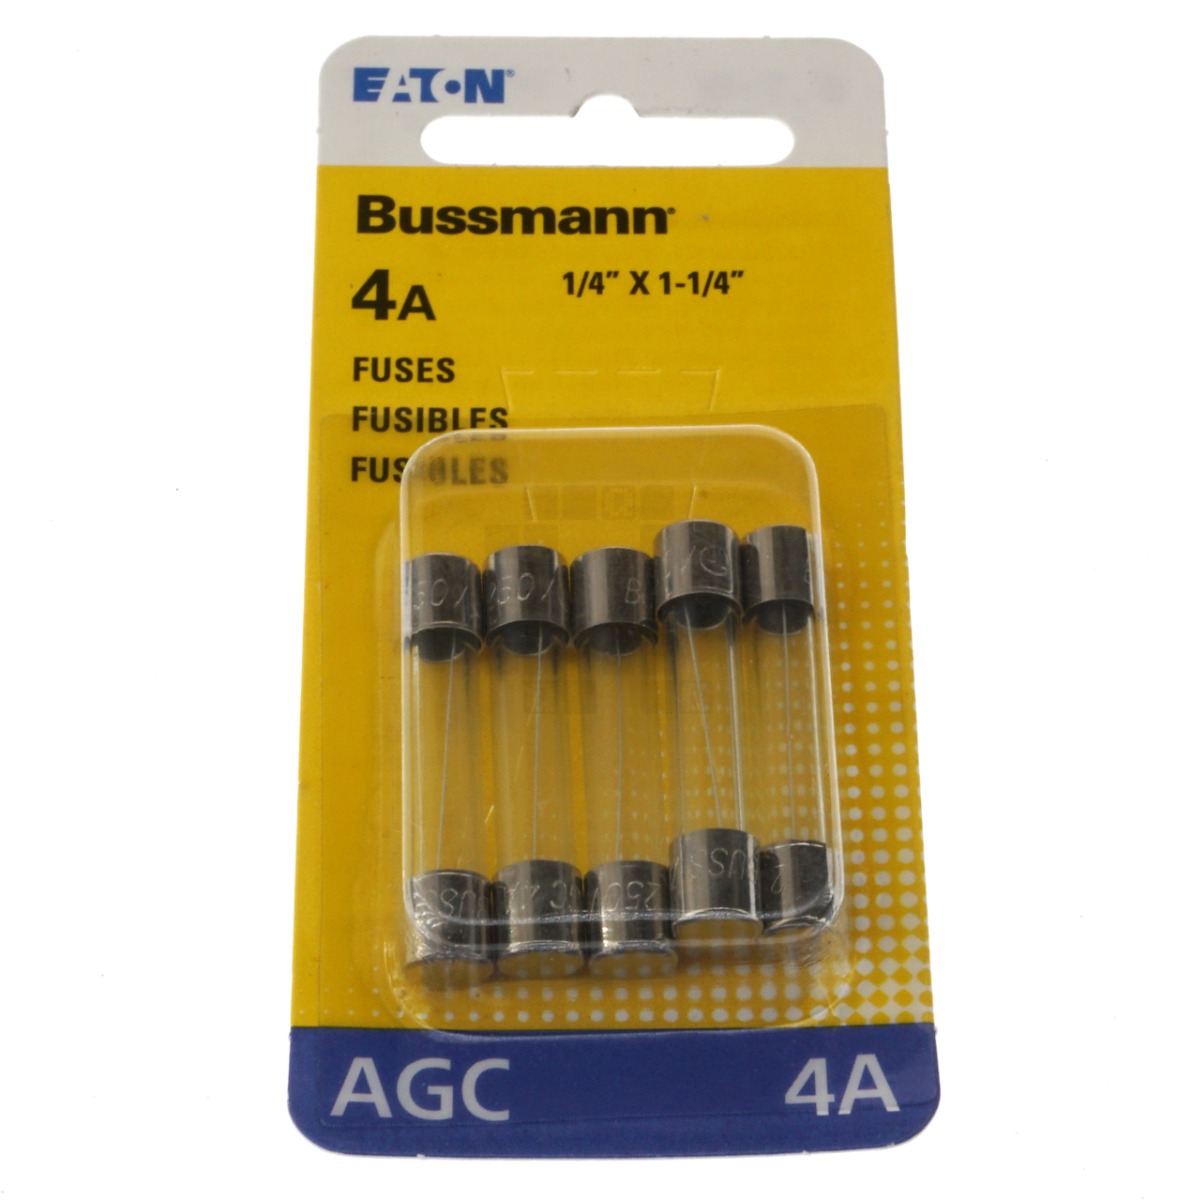 Eaton Bussman BP/AGC-4-RP Fast Acting Glass Fuse 5 Pack, 4 Amps, 250VAC